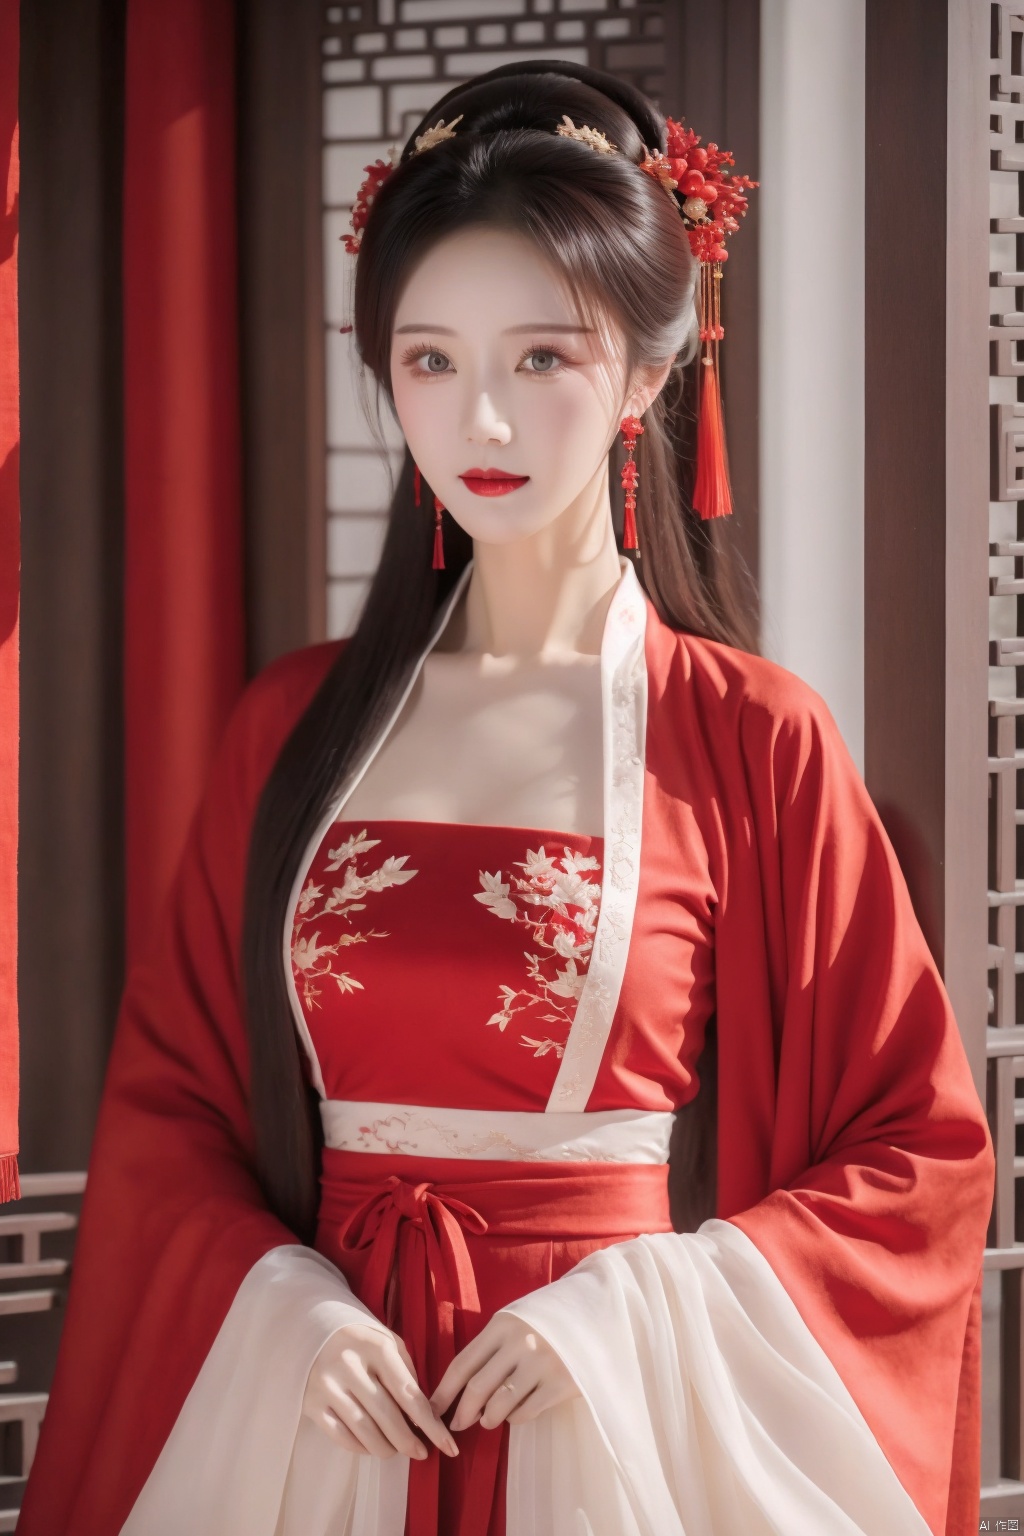 1 bride,Chinese ice crystal diamond earrings,be richly attired and heavily made-upEye shadow,blusher,Dress,chest,be shy,Hanfu,Red (clothes),streamer,red(veil),Transparent coat，red(gauze headscarf）